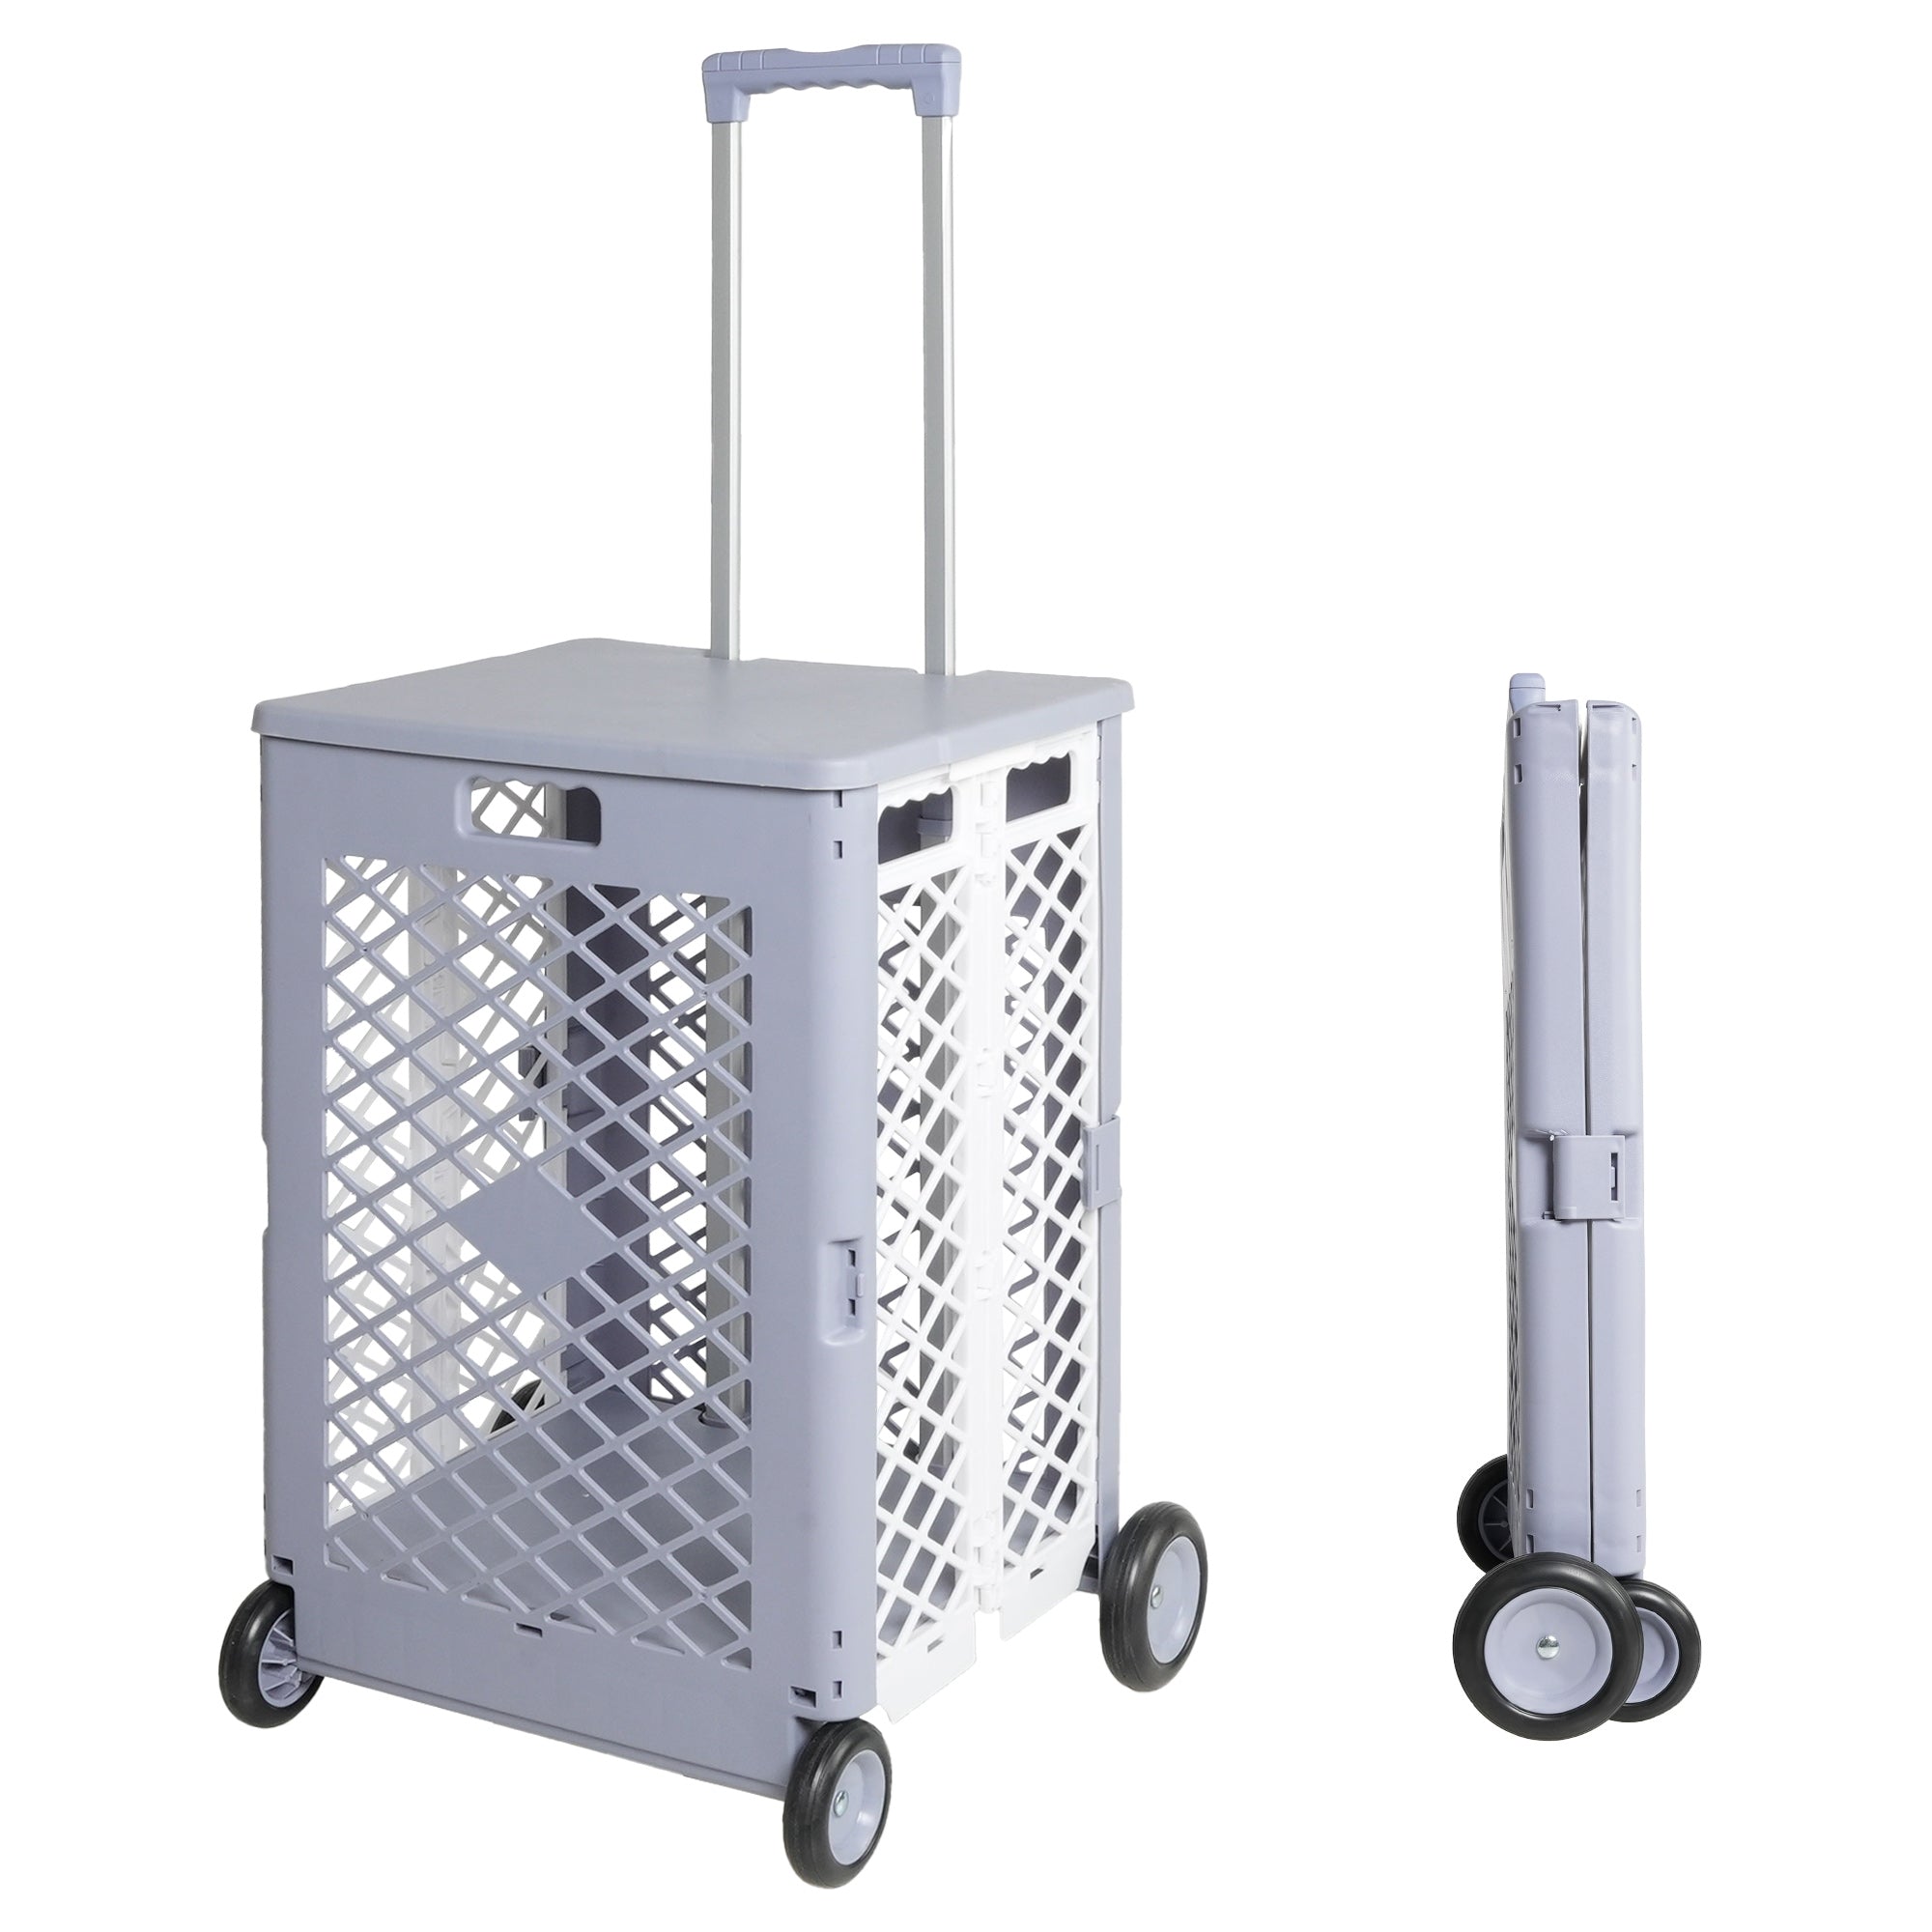 Foldable Mesh Rolling Cart with Wheels, updated Utility Tools Rolling Crate  w/ Telescopic Handle, Grey White